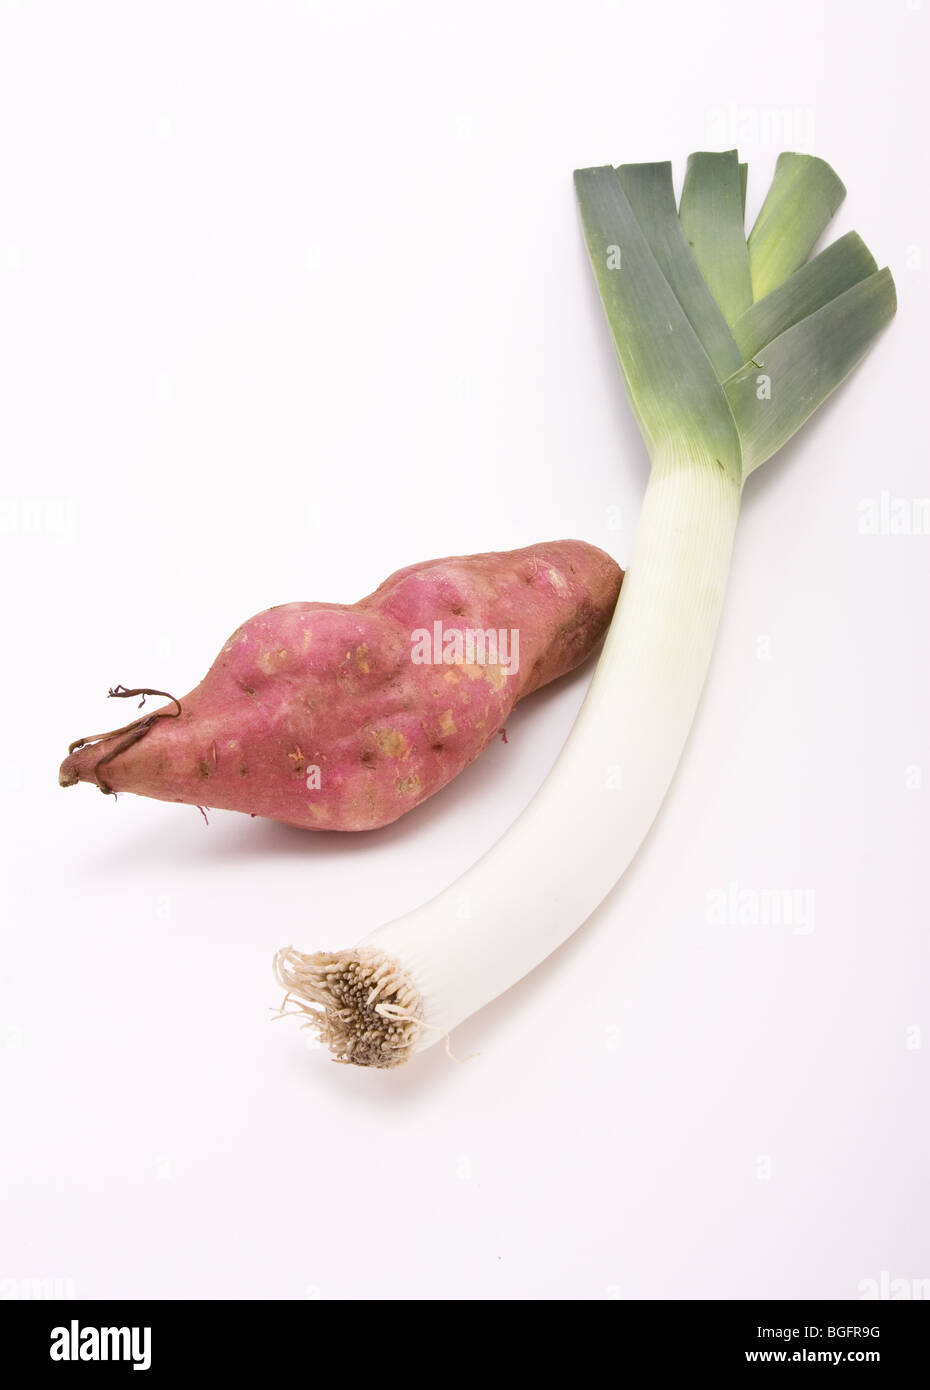 Sweet potato and Leek against white background from low perspective. Stock Photo